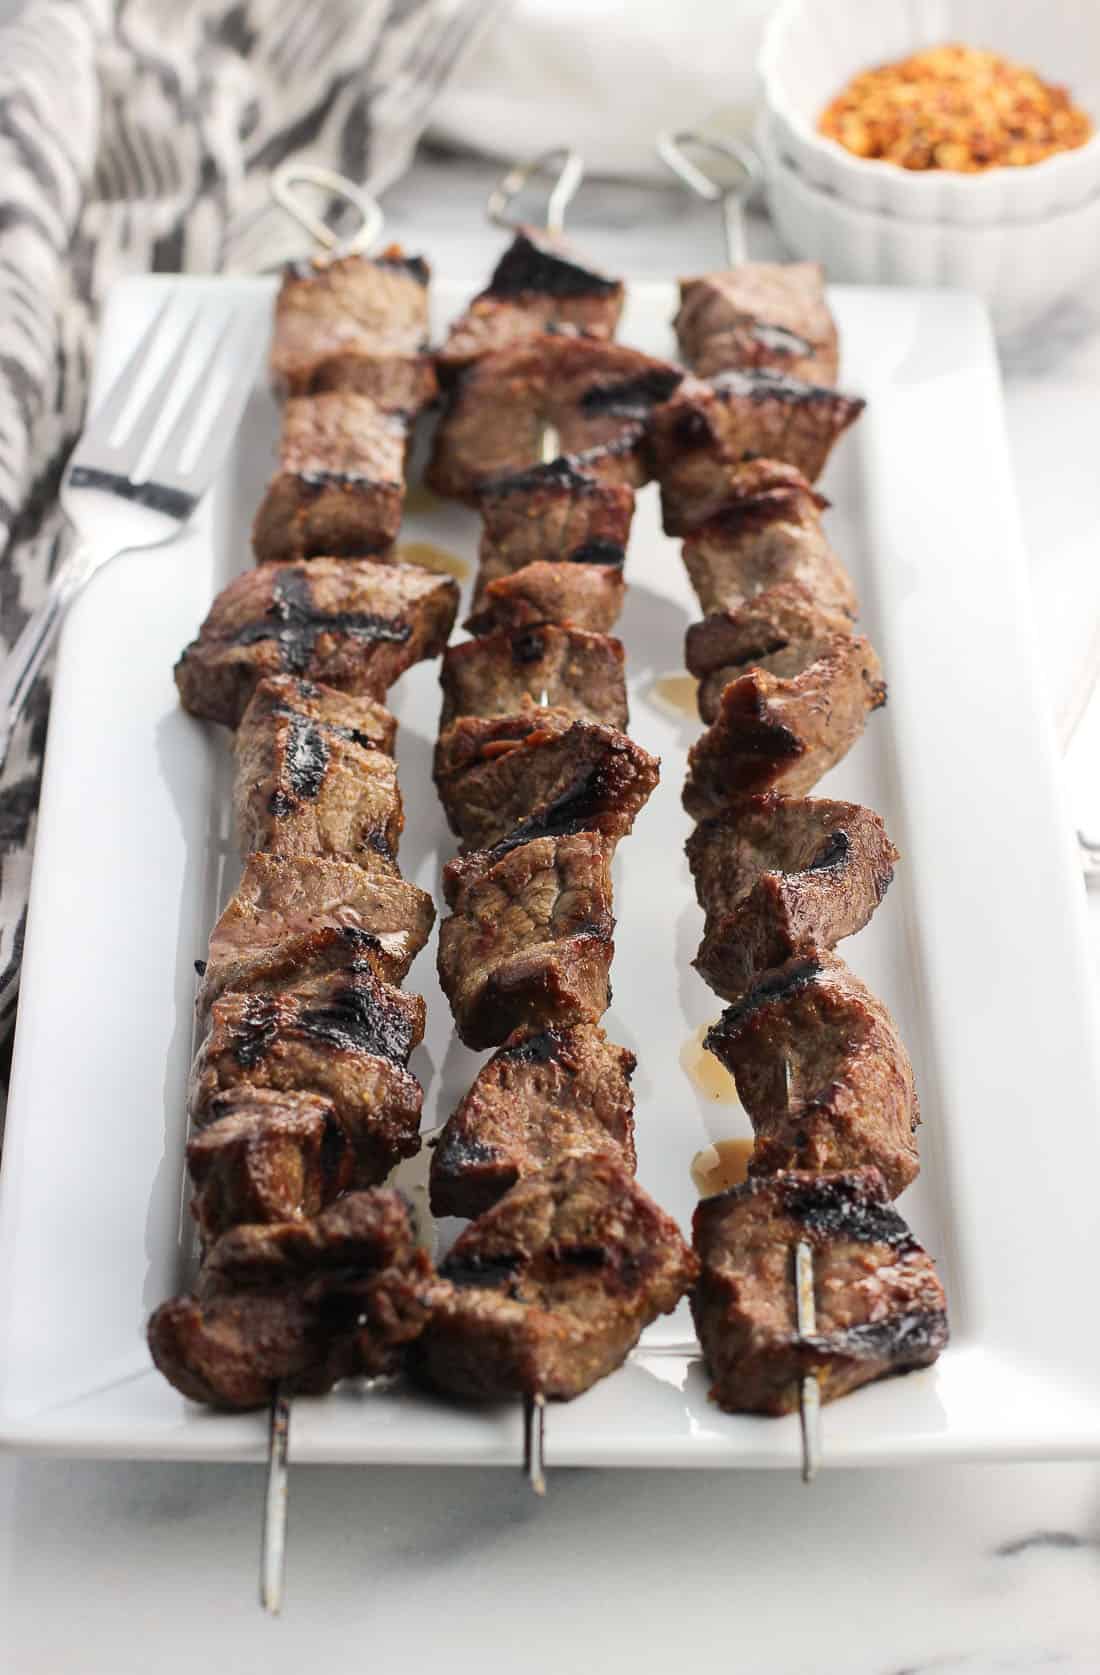 Three stainless steel skewers of steak bites on a rectangular tray with seasoning and a fork in the background